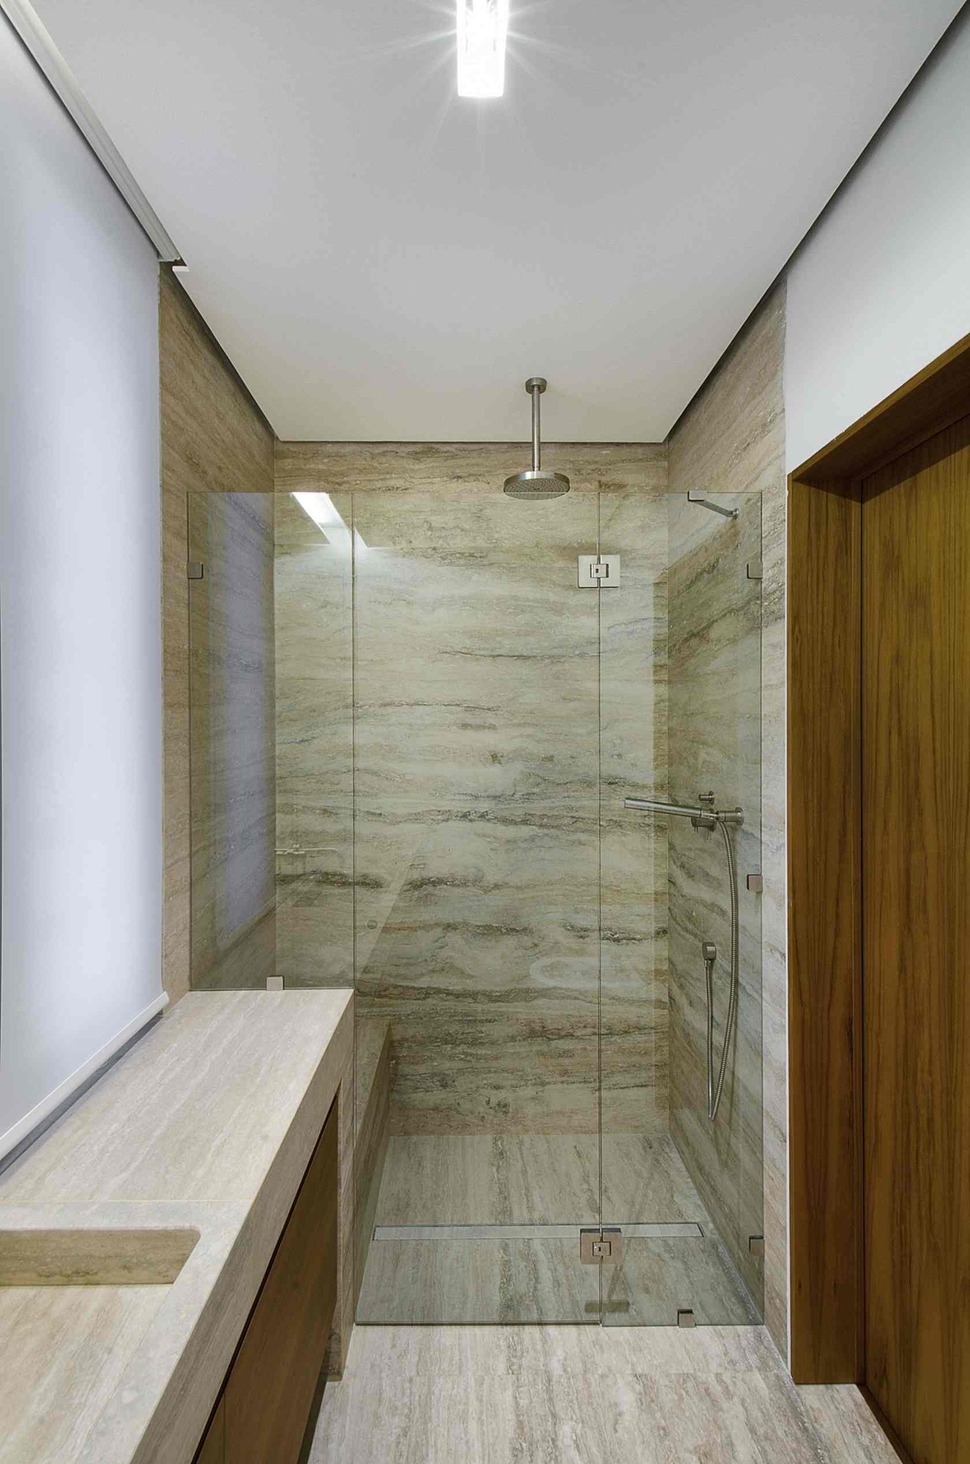 minimal-italian-home-blends-unique-stone-wood-finishes-22-shower.jpg